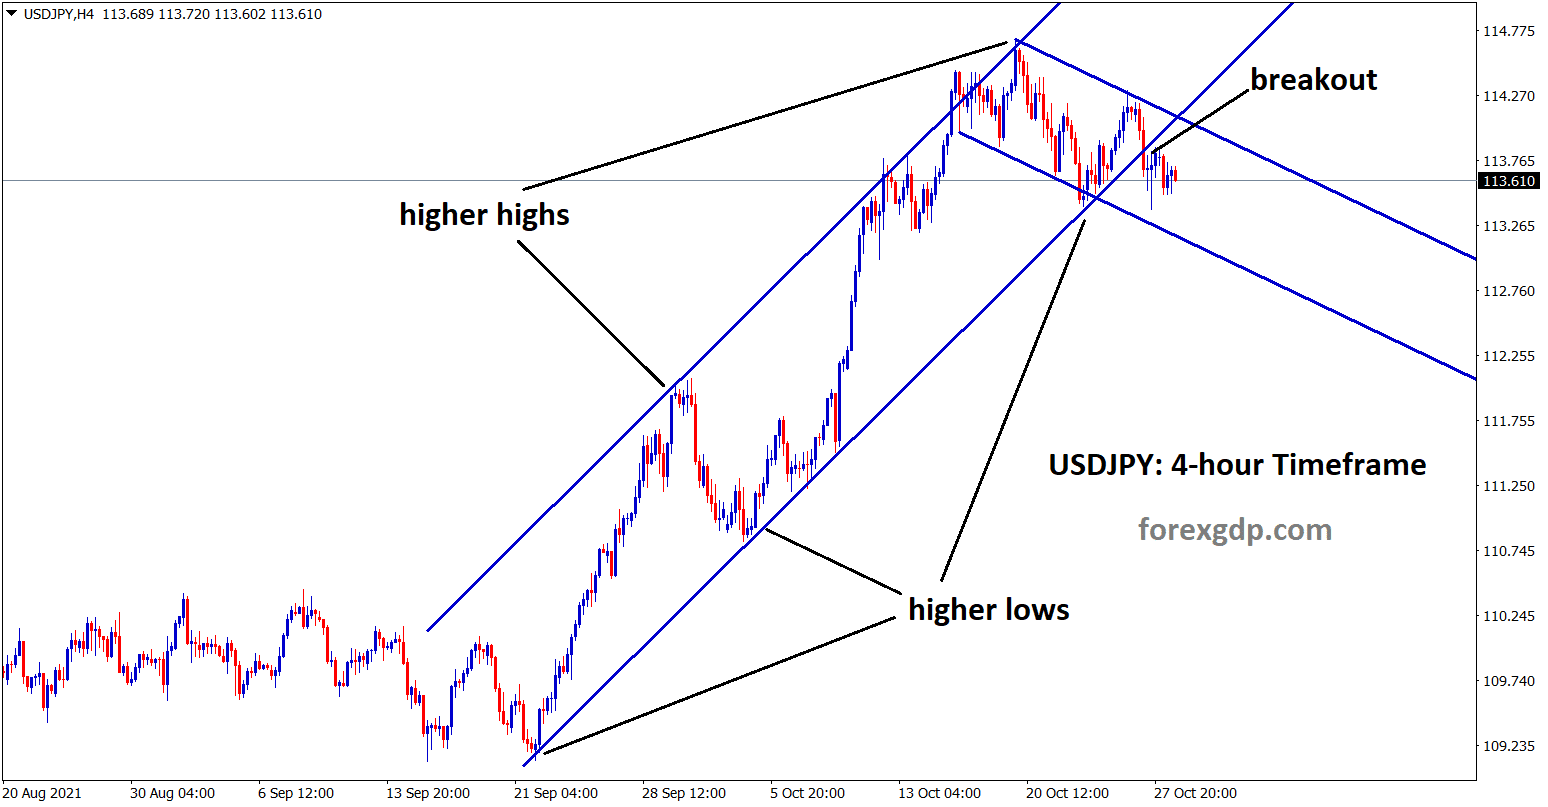 USDJPY has broken the bottom higher low area of the major ascending channel and now the market is moving in a minor descending channel